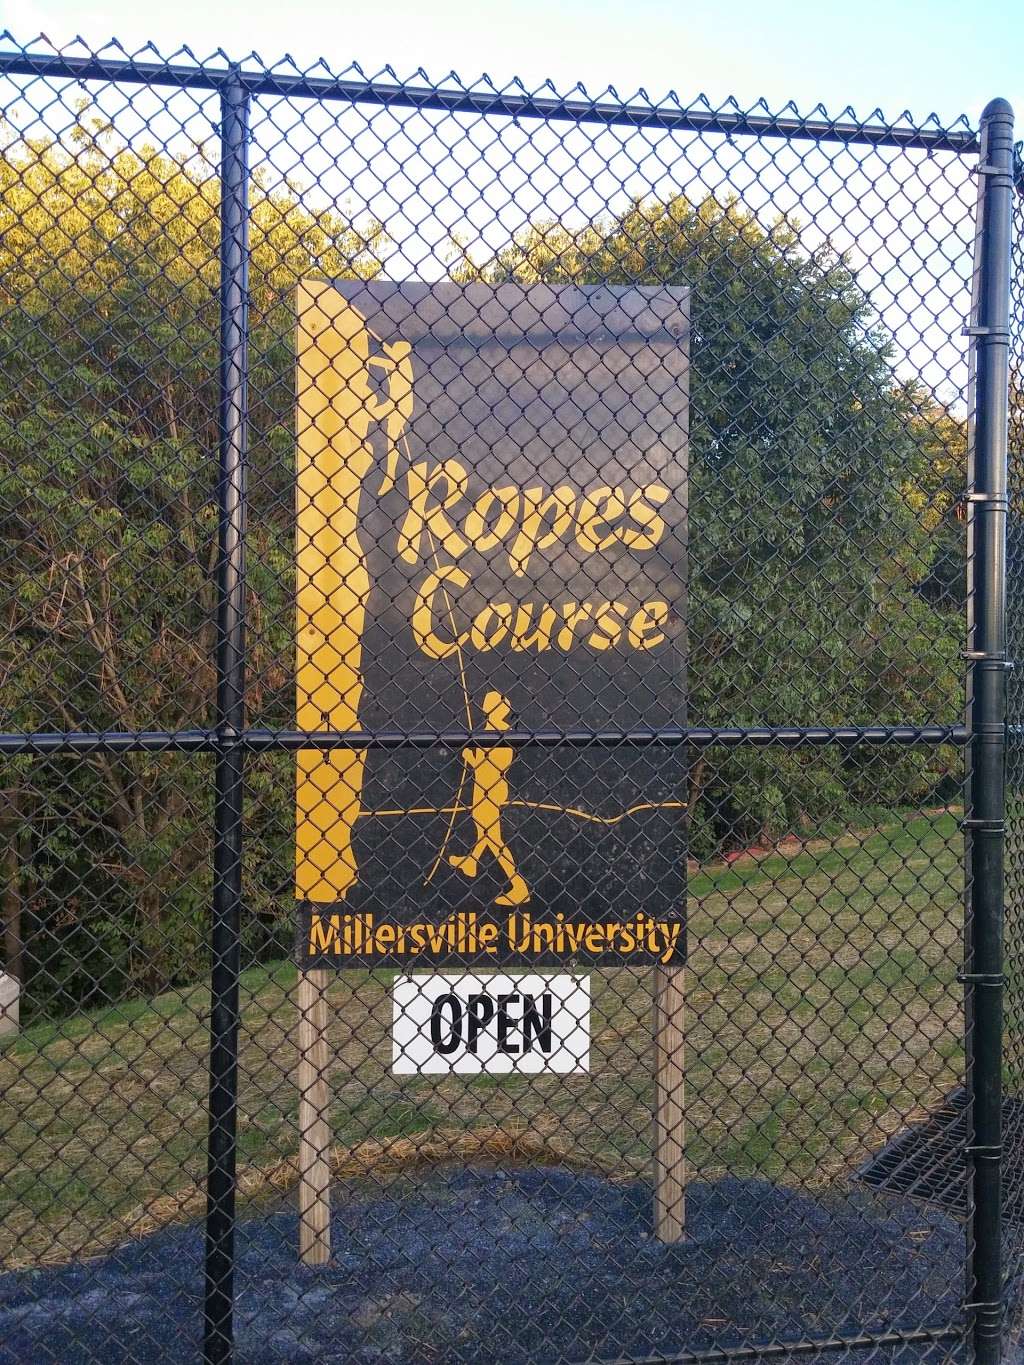 Millersville University Ropes Course | 125 Pucillo Dr, Millersville, PA 17551